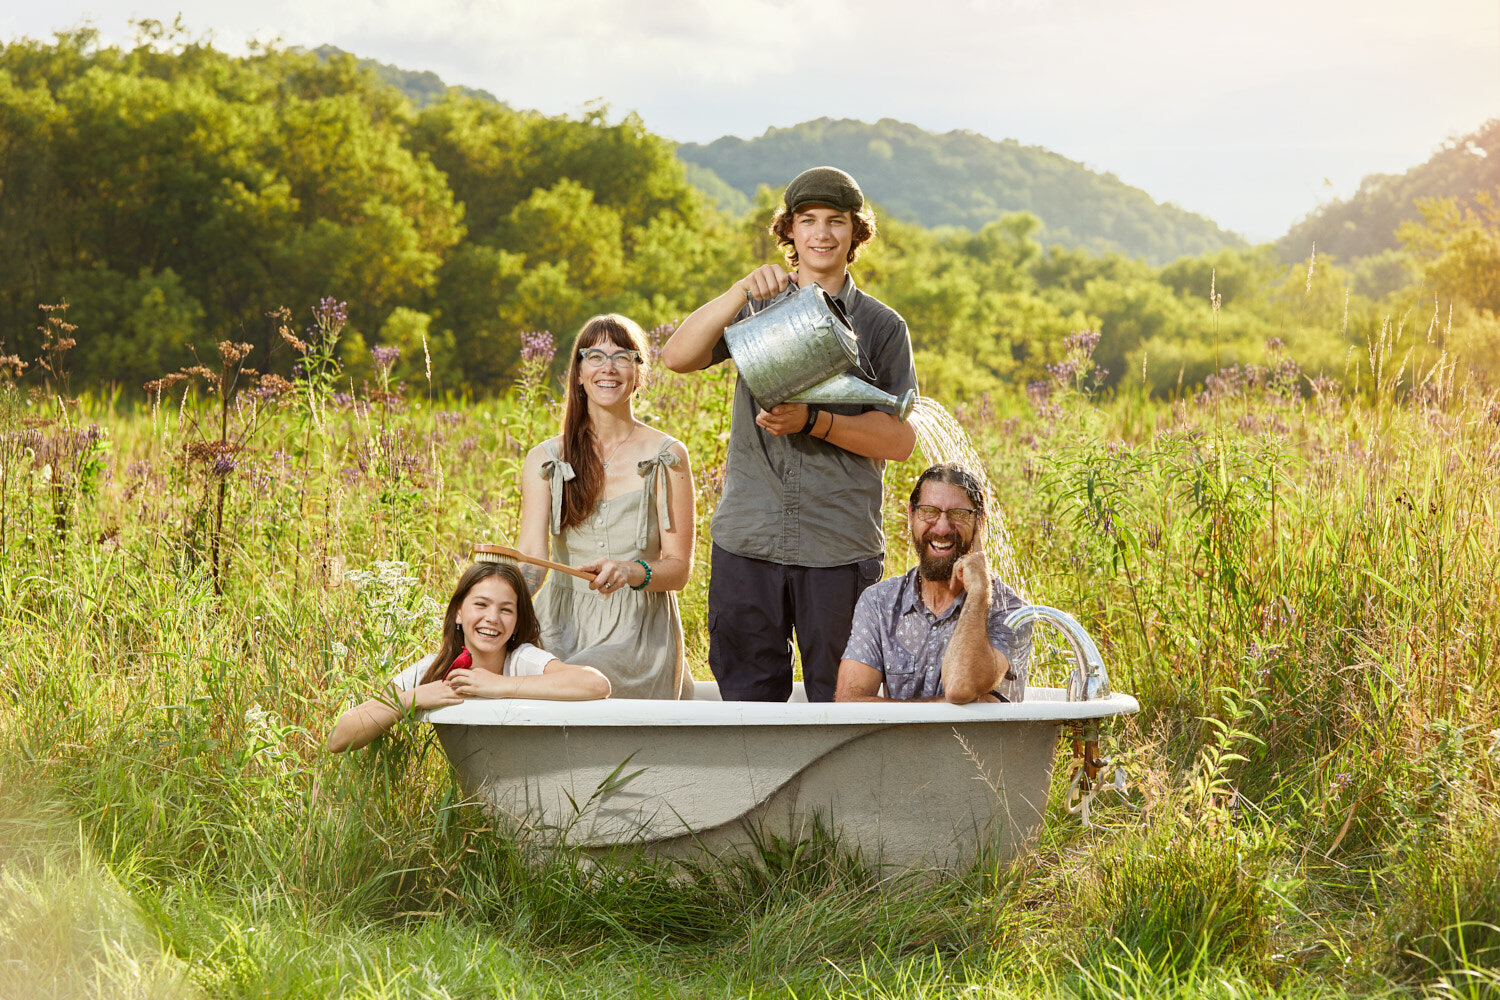 whimsical portrait of family in bathtub in a field , son pouring water on dad by creative portrait photographer Hanna Agar